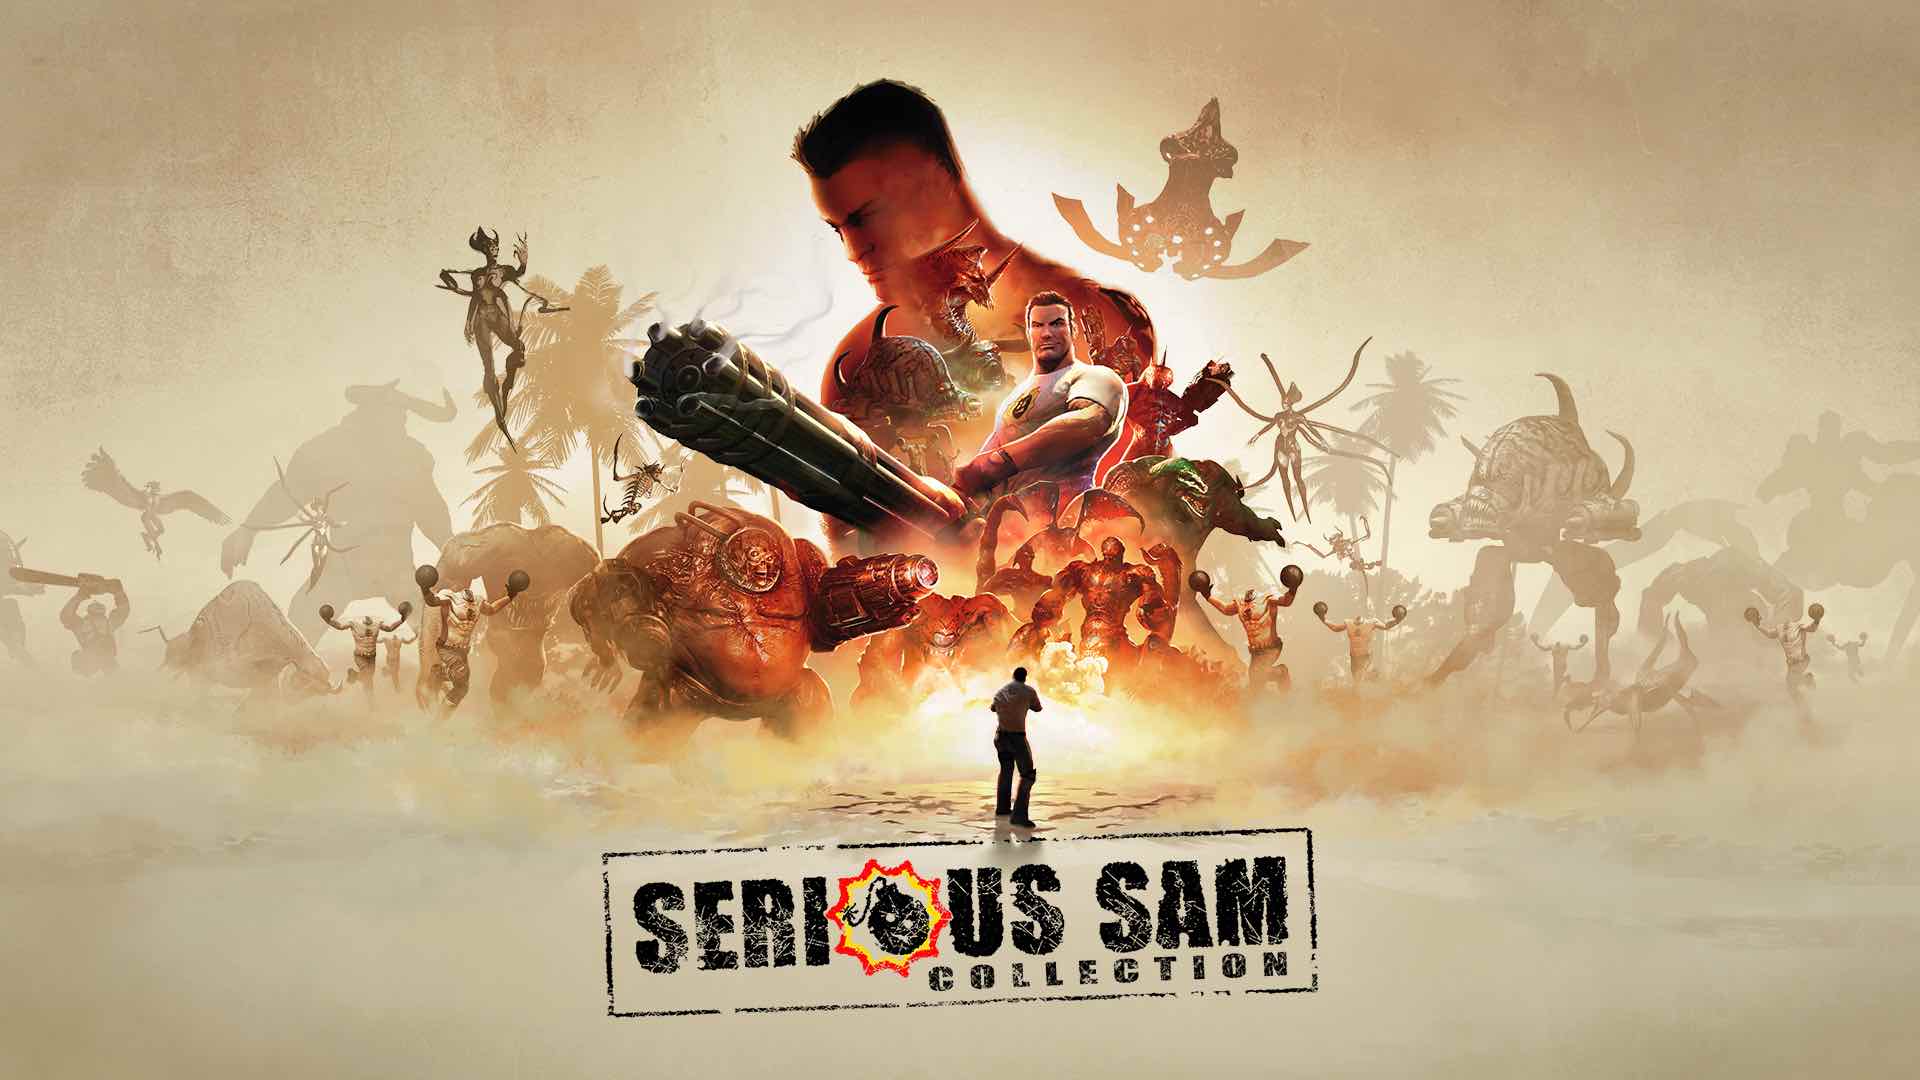 Serious Sam Collection [Switch] Review – Actually Quite Silly